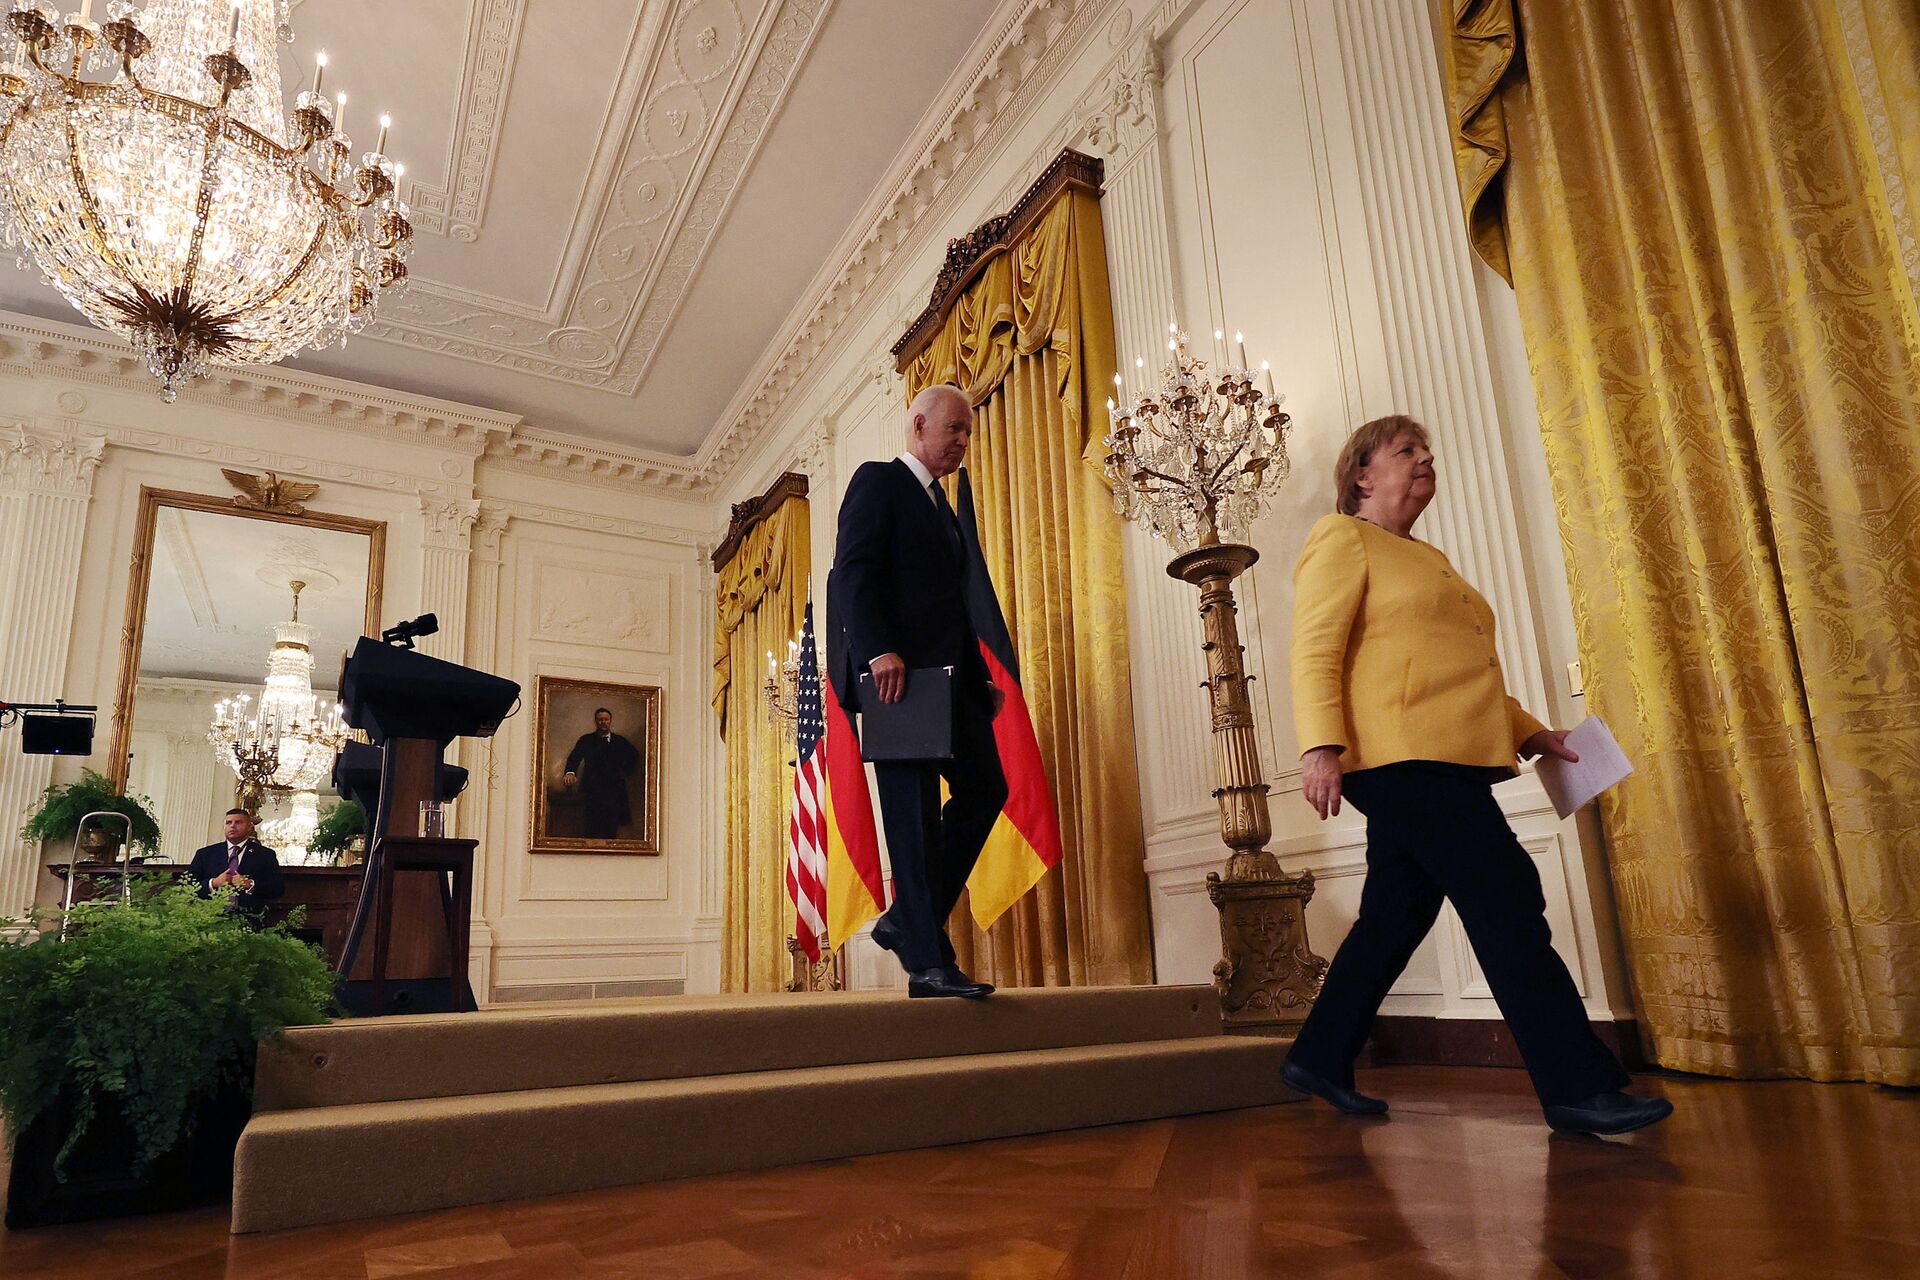 German Chancellor Angela Merkel (R) and U.S. President Joe Biden leave a joint news conference in the East Room of the White House on July 15, 2021 in Washington, DC. During what is likely her last official visit to Washington, Merkel and Biden are expected to discuss their shared priorities on climate change and defense; and Biden voiced his concerns about the Nord Stream 2 Russian natural gas pipeline. - Sputnik International, 1920, 07.09.2021